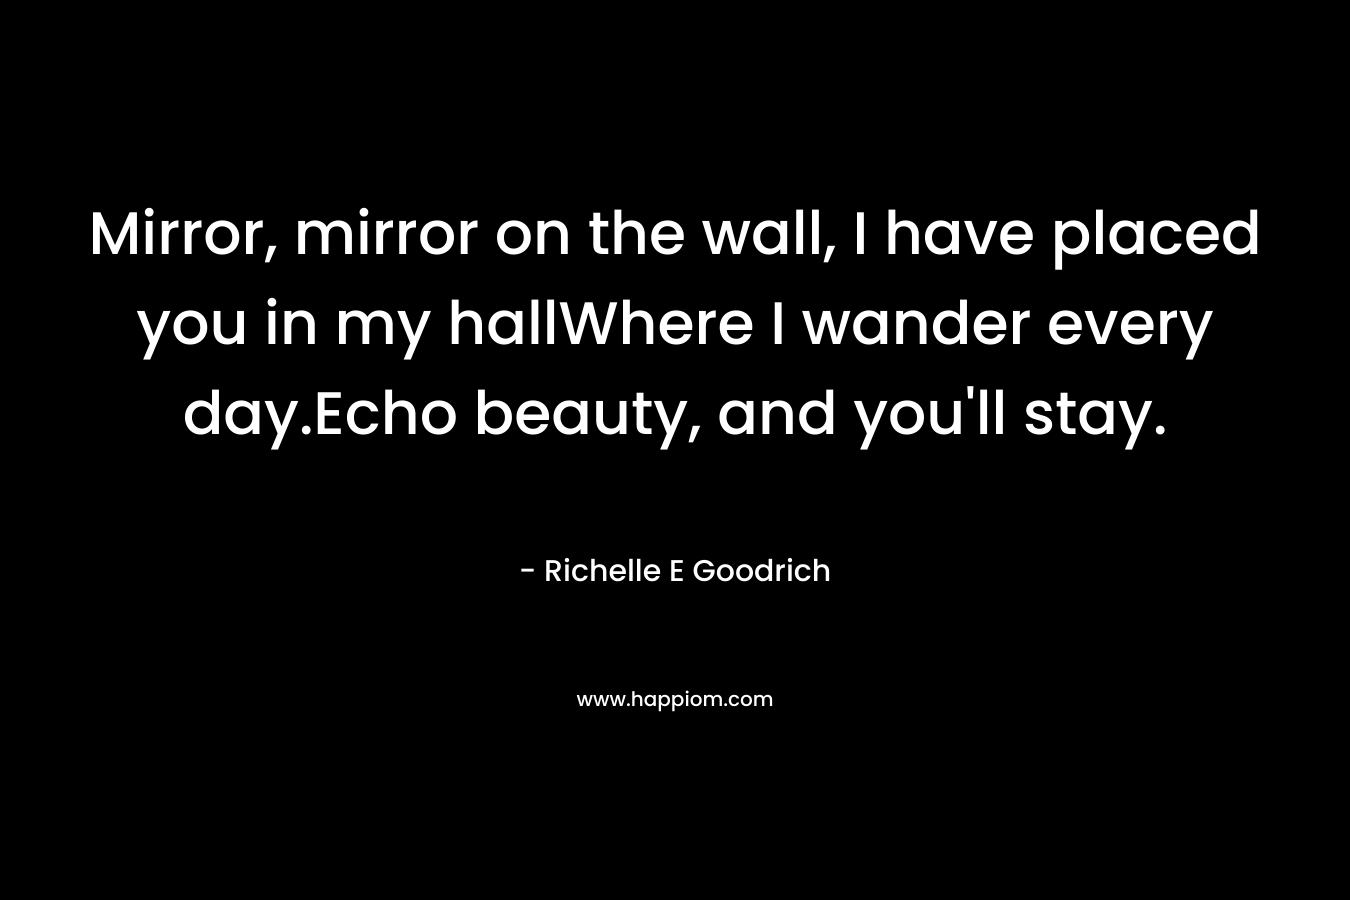 Mirror, mirror on the wall, I have placed you in my hallWhere I wander every day.Echo beauty, and you'll stay.